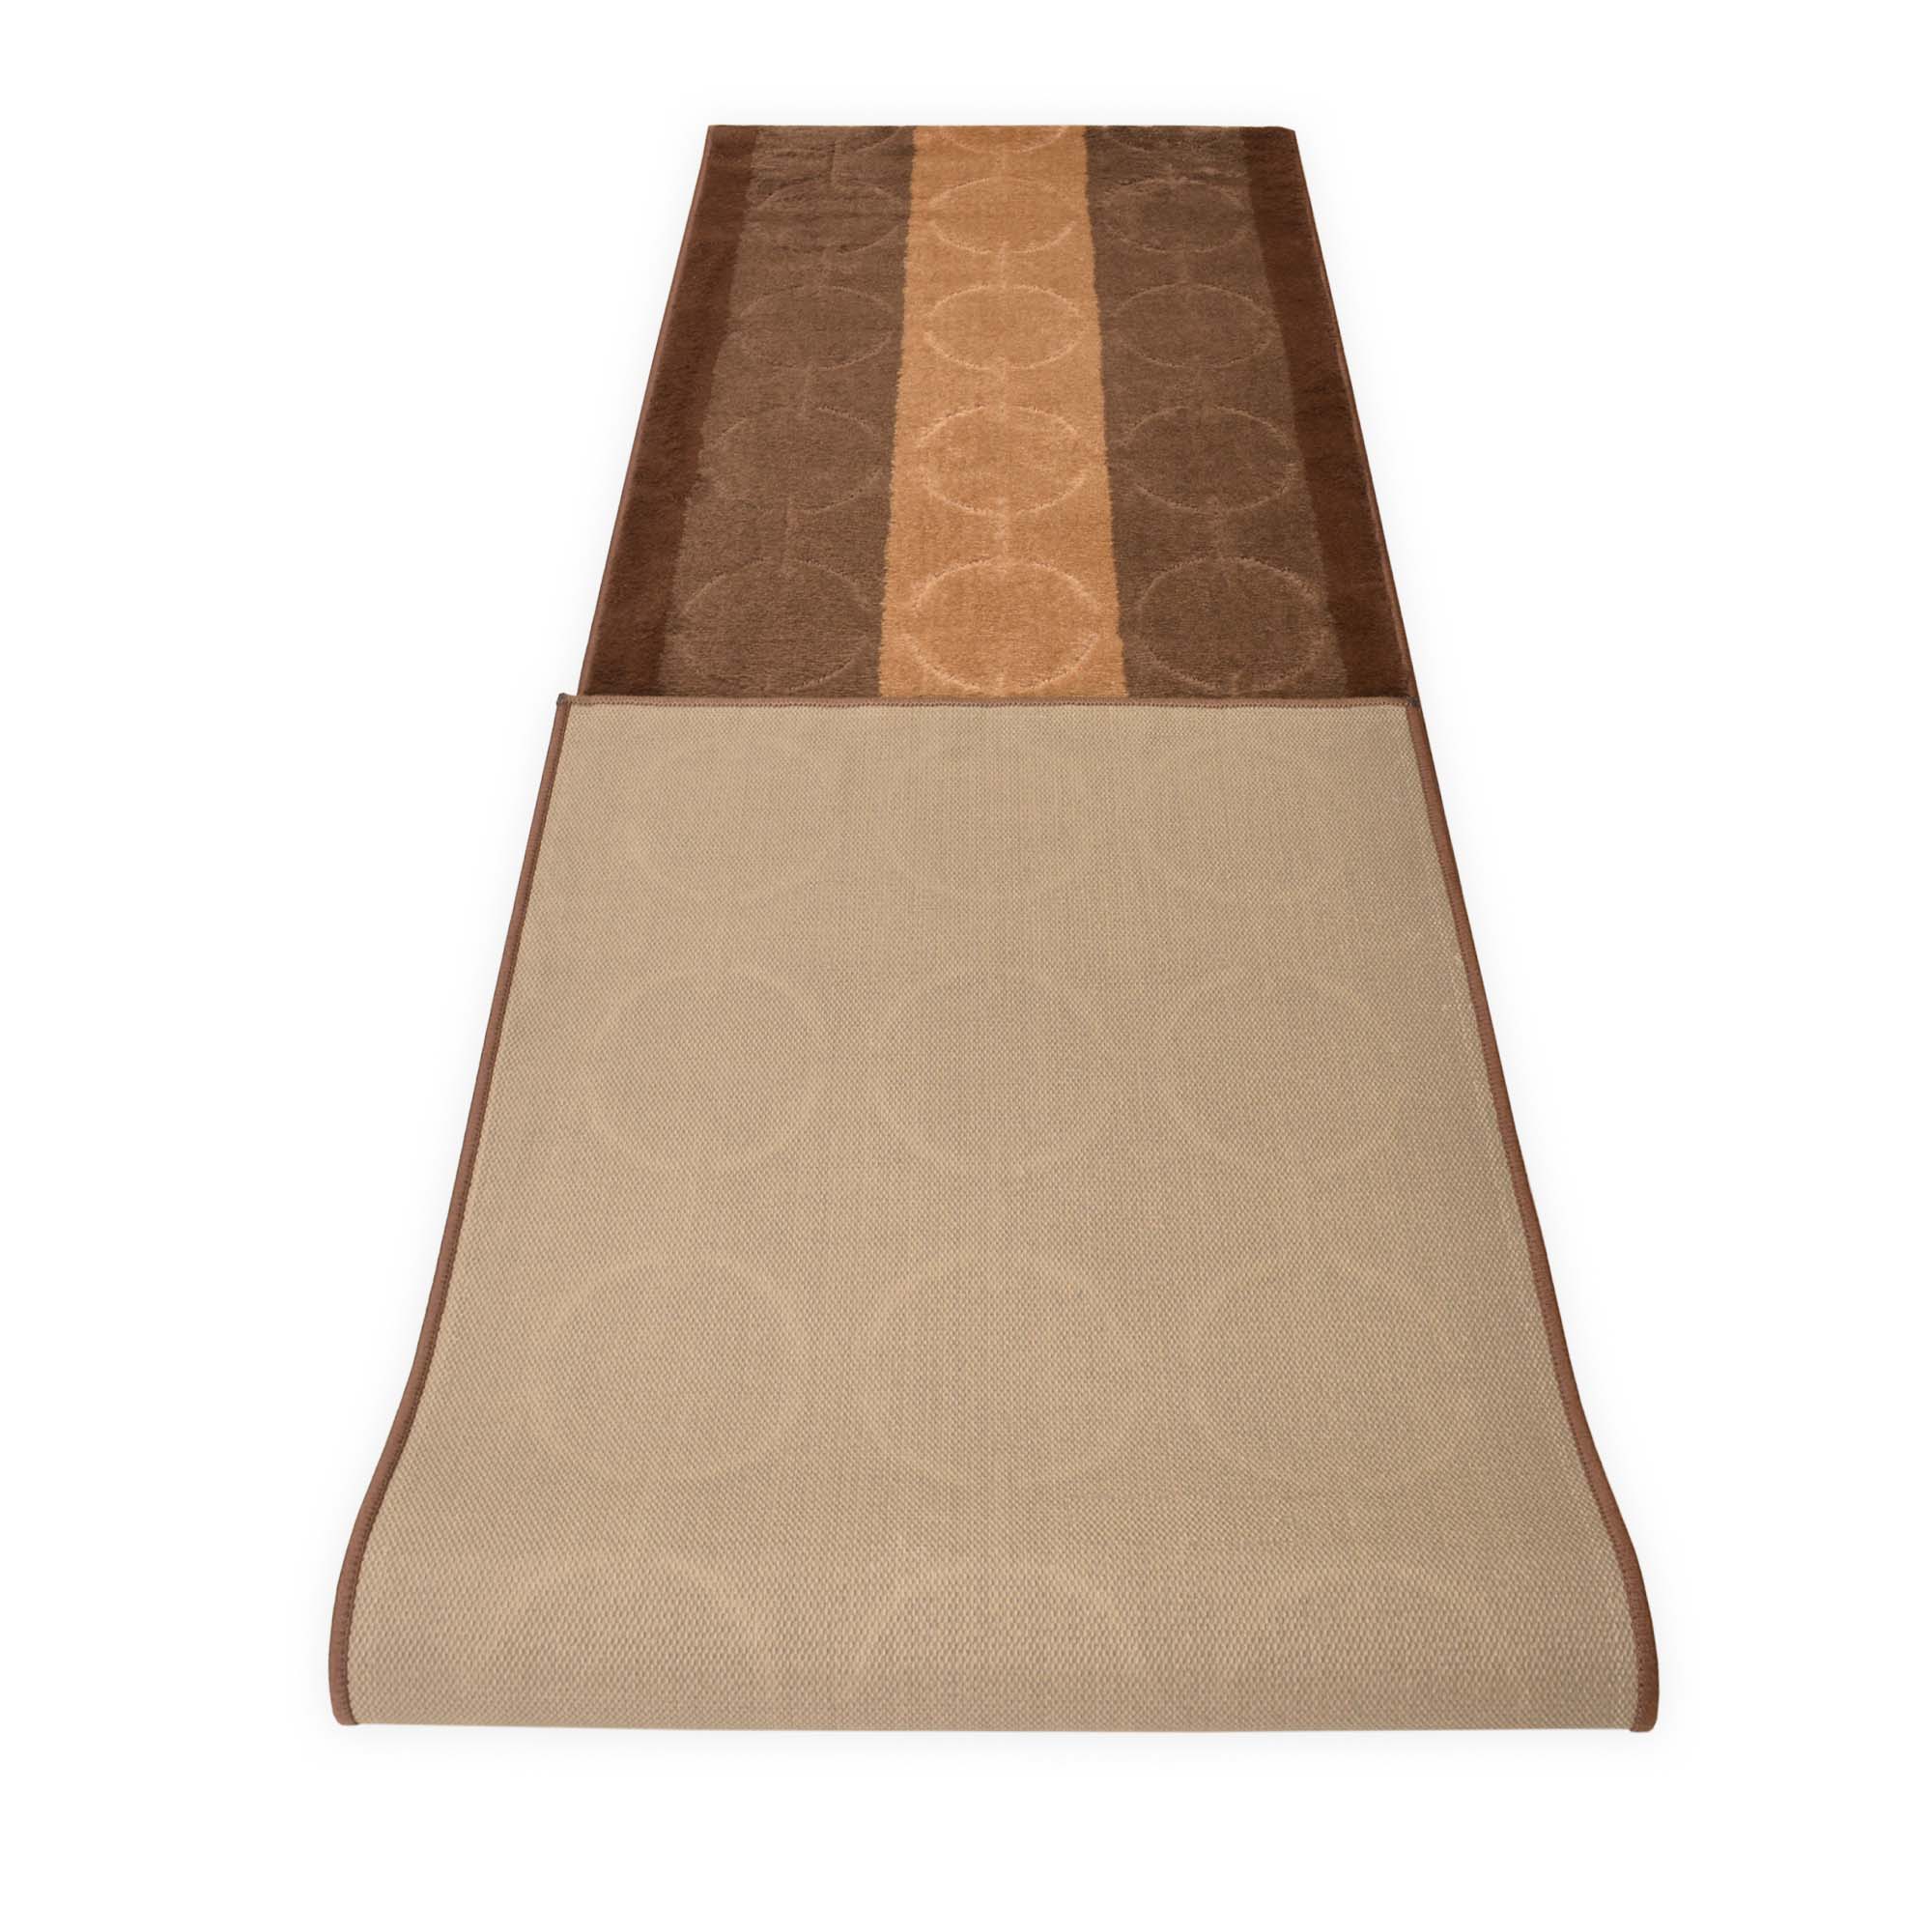 Machine Washable Custom Size Runner Rug Platin Circles Abstract Brown Skid Resistant Runner Rug  Customize Up to 50 Feet and 26 Inch Width Runner Rug-3